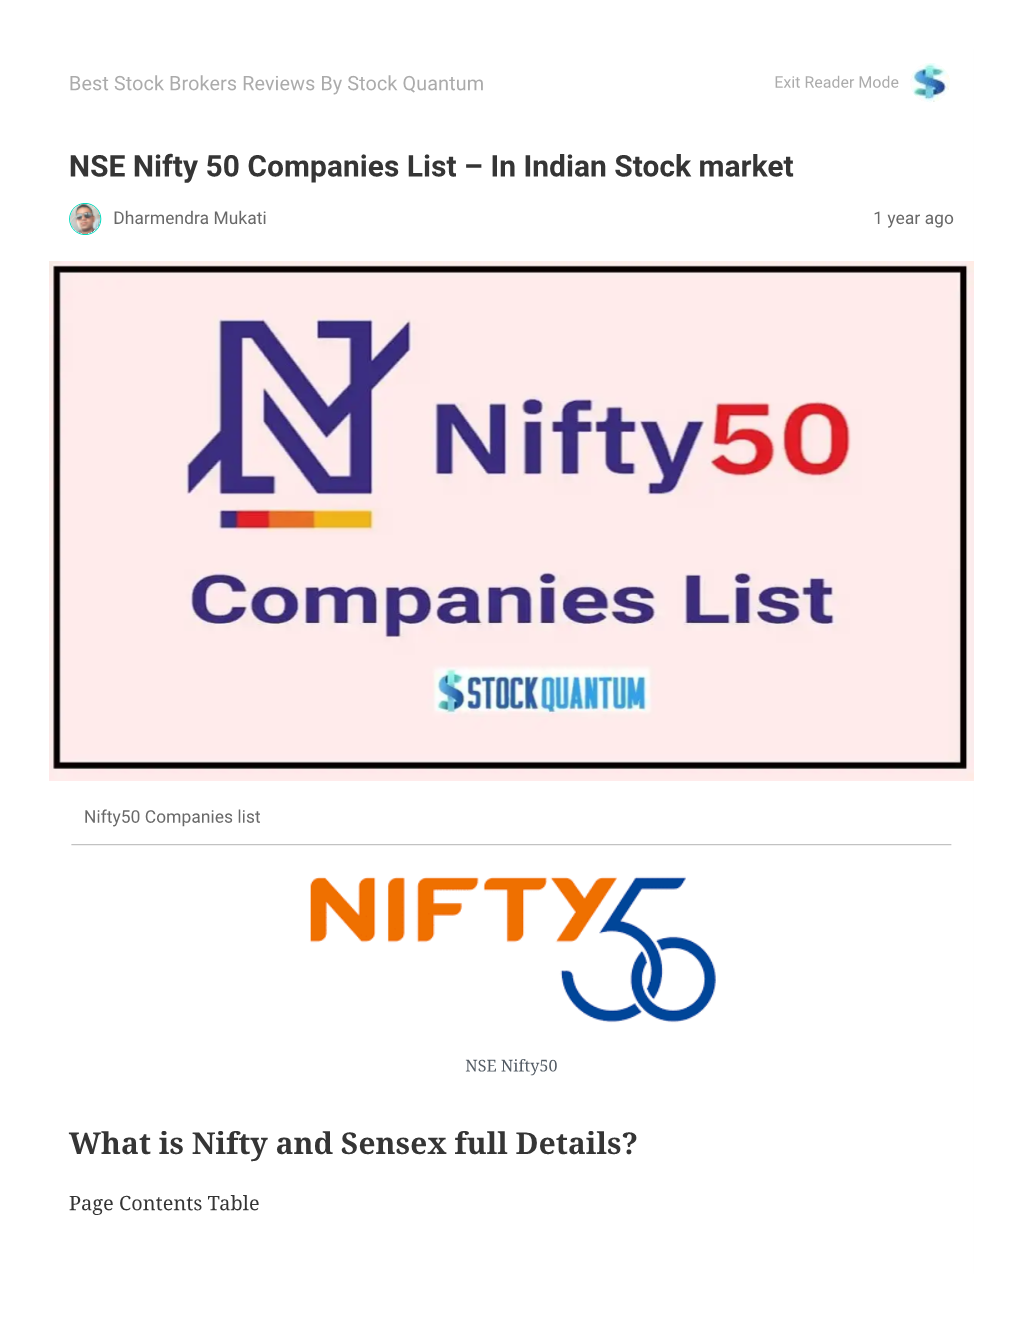 NSE Nifty 50 Companies List – in Indian Stock Market